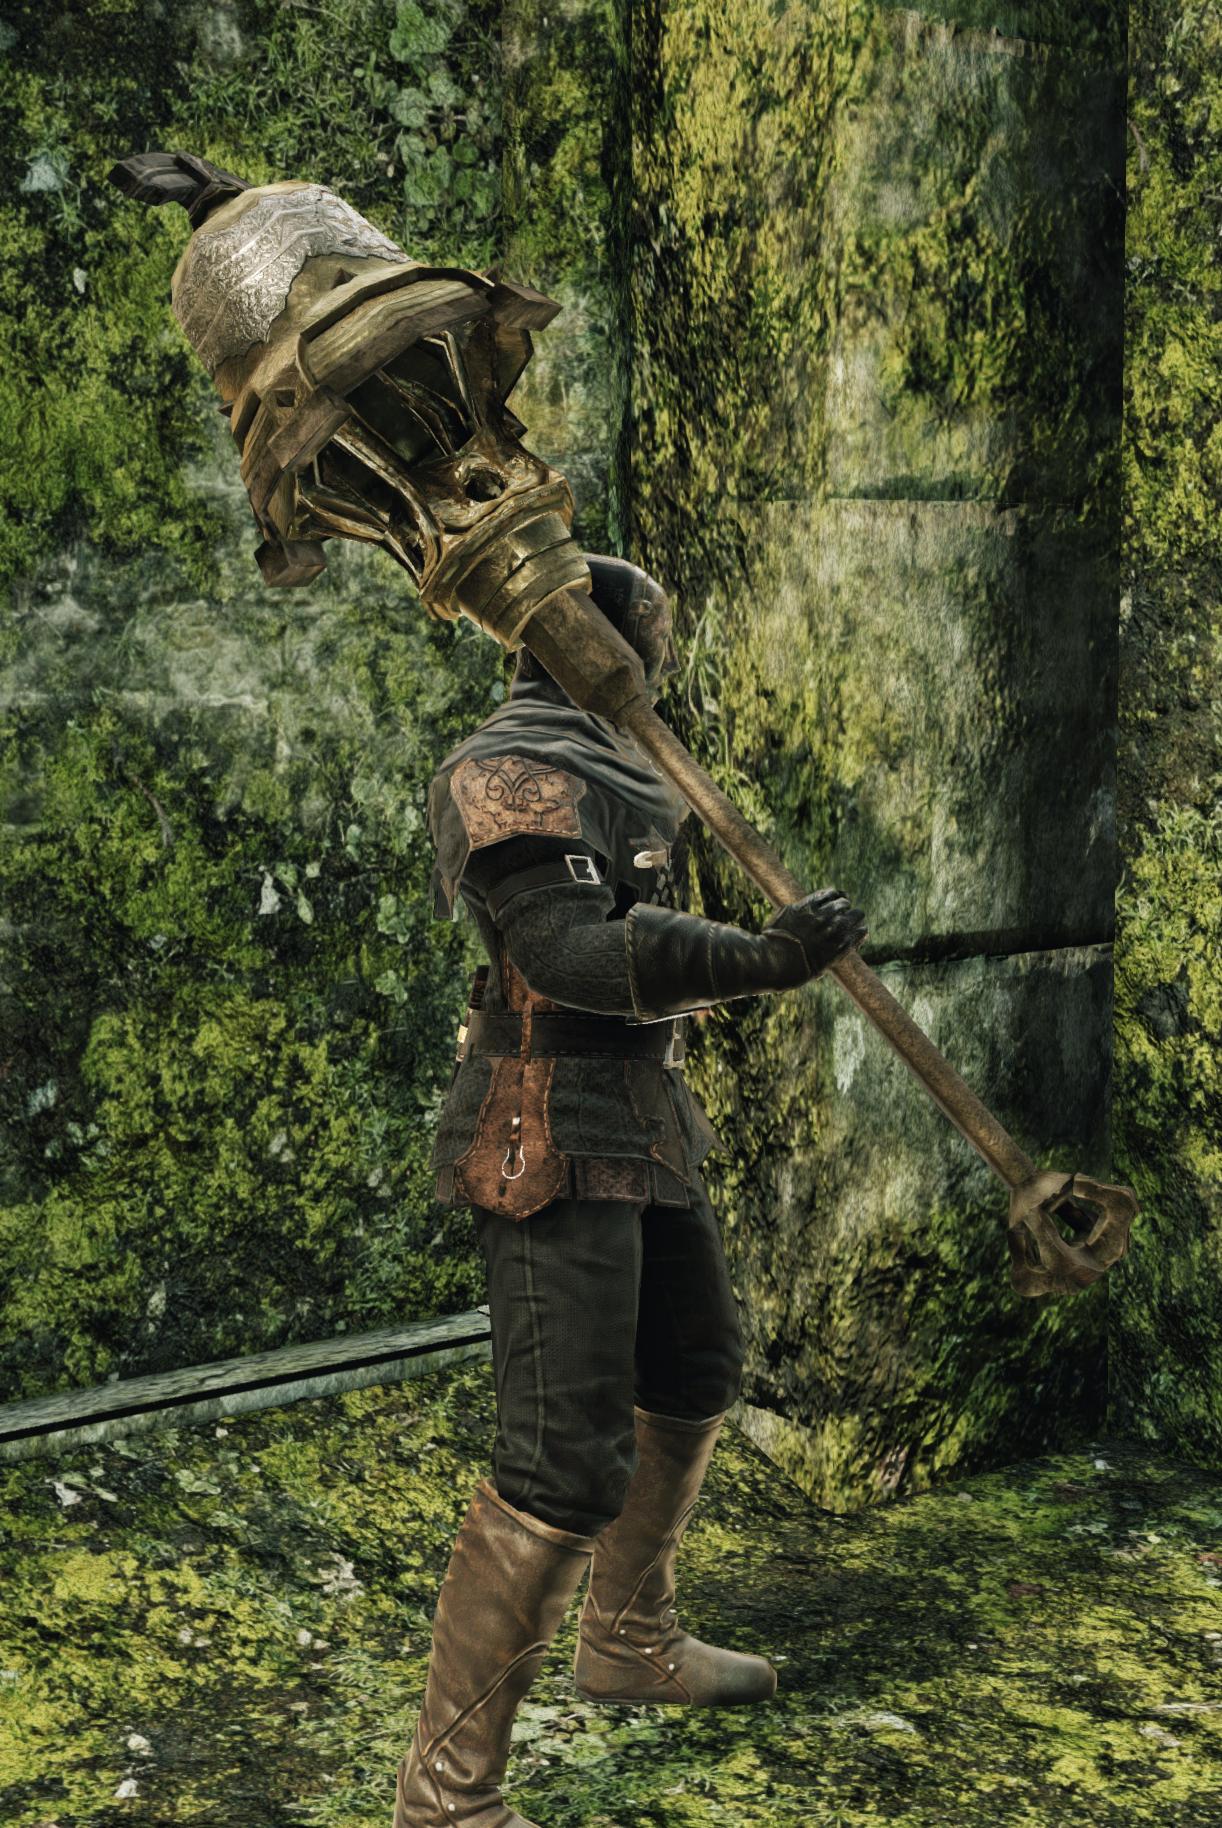 How I Beat Dark Souls 2 Using a Ladle, Part 2: Timber